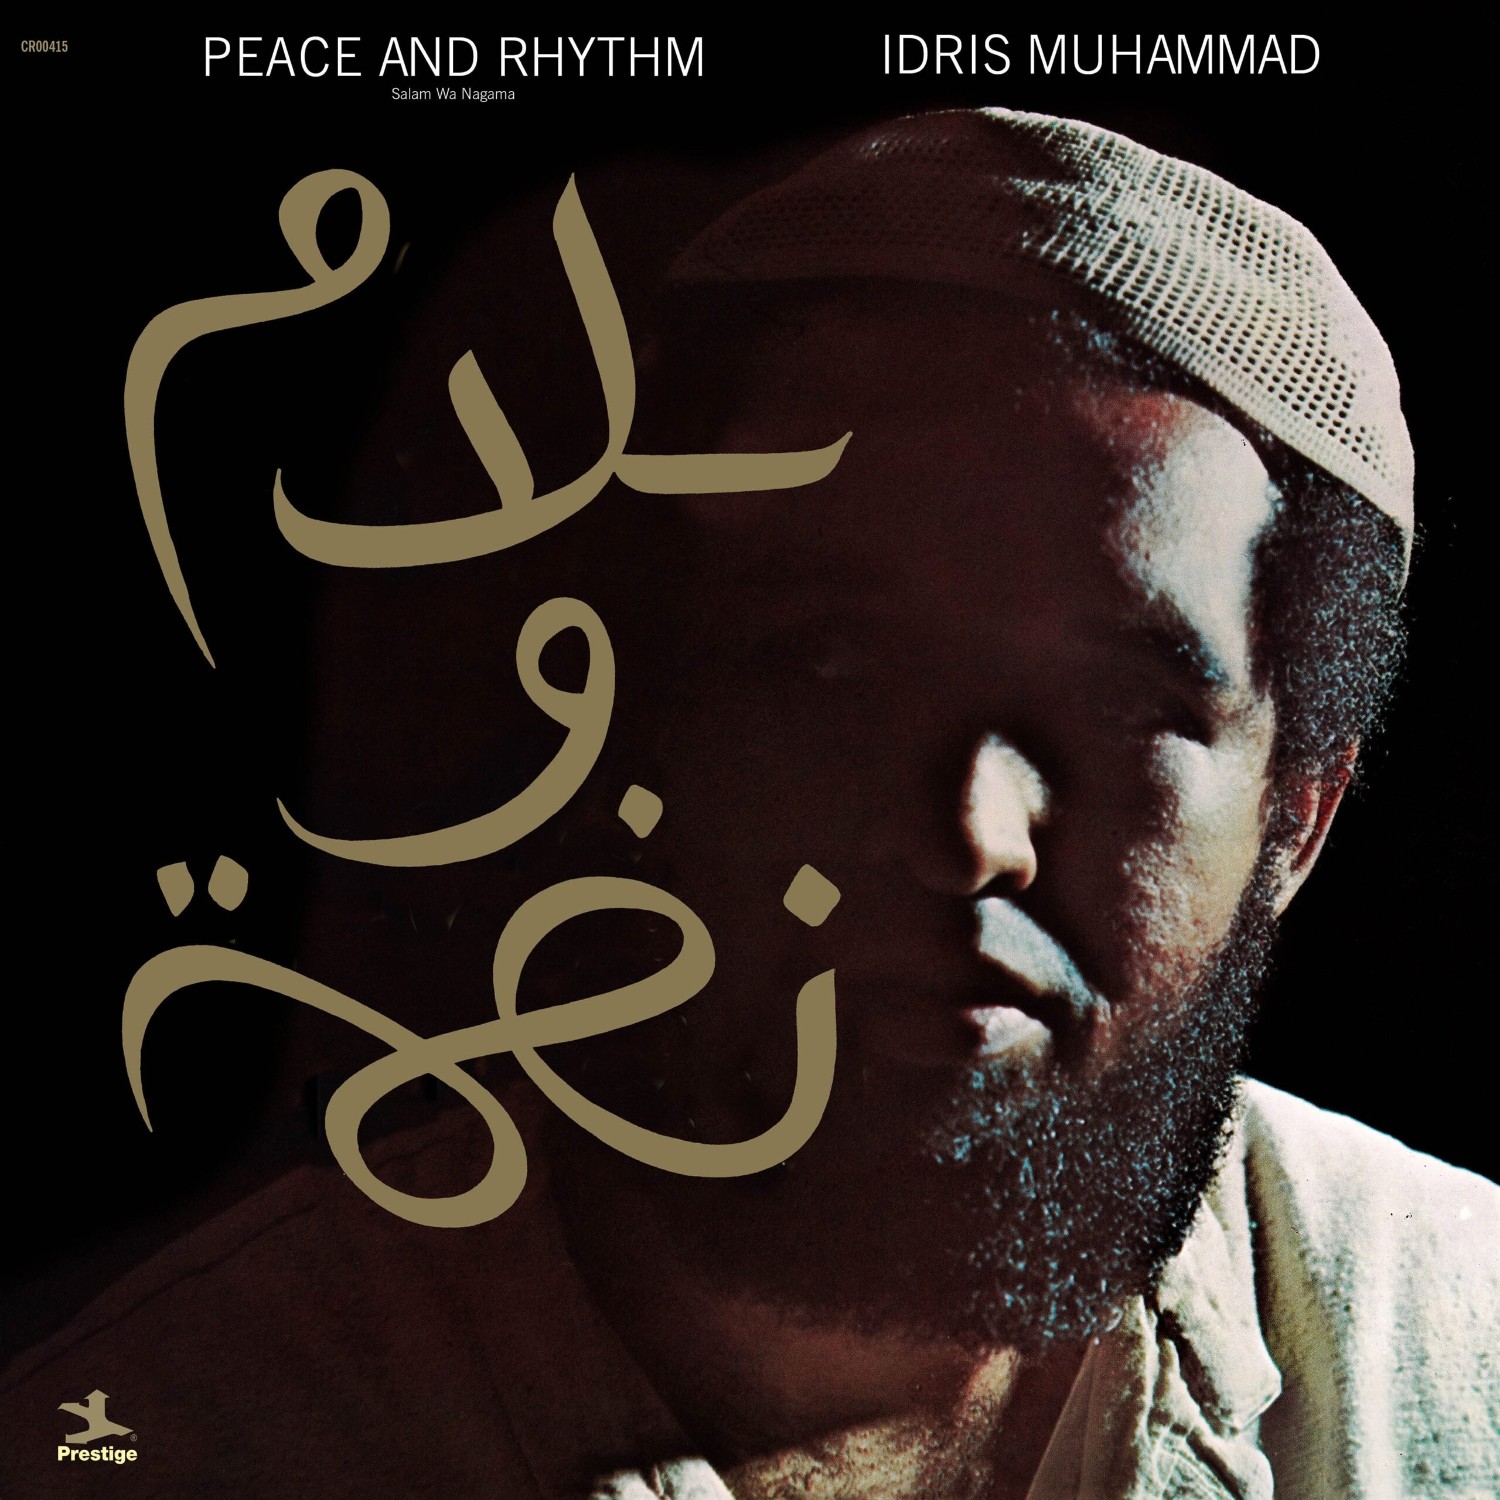 Featured Image for “Idris Muhammad – Peace and Rhythm”